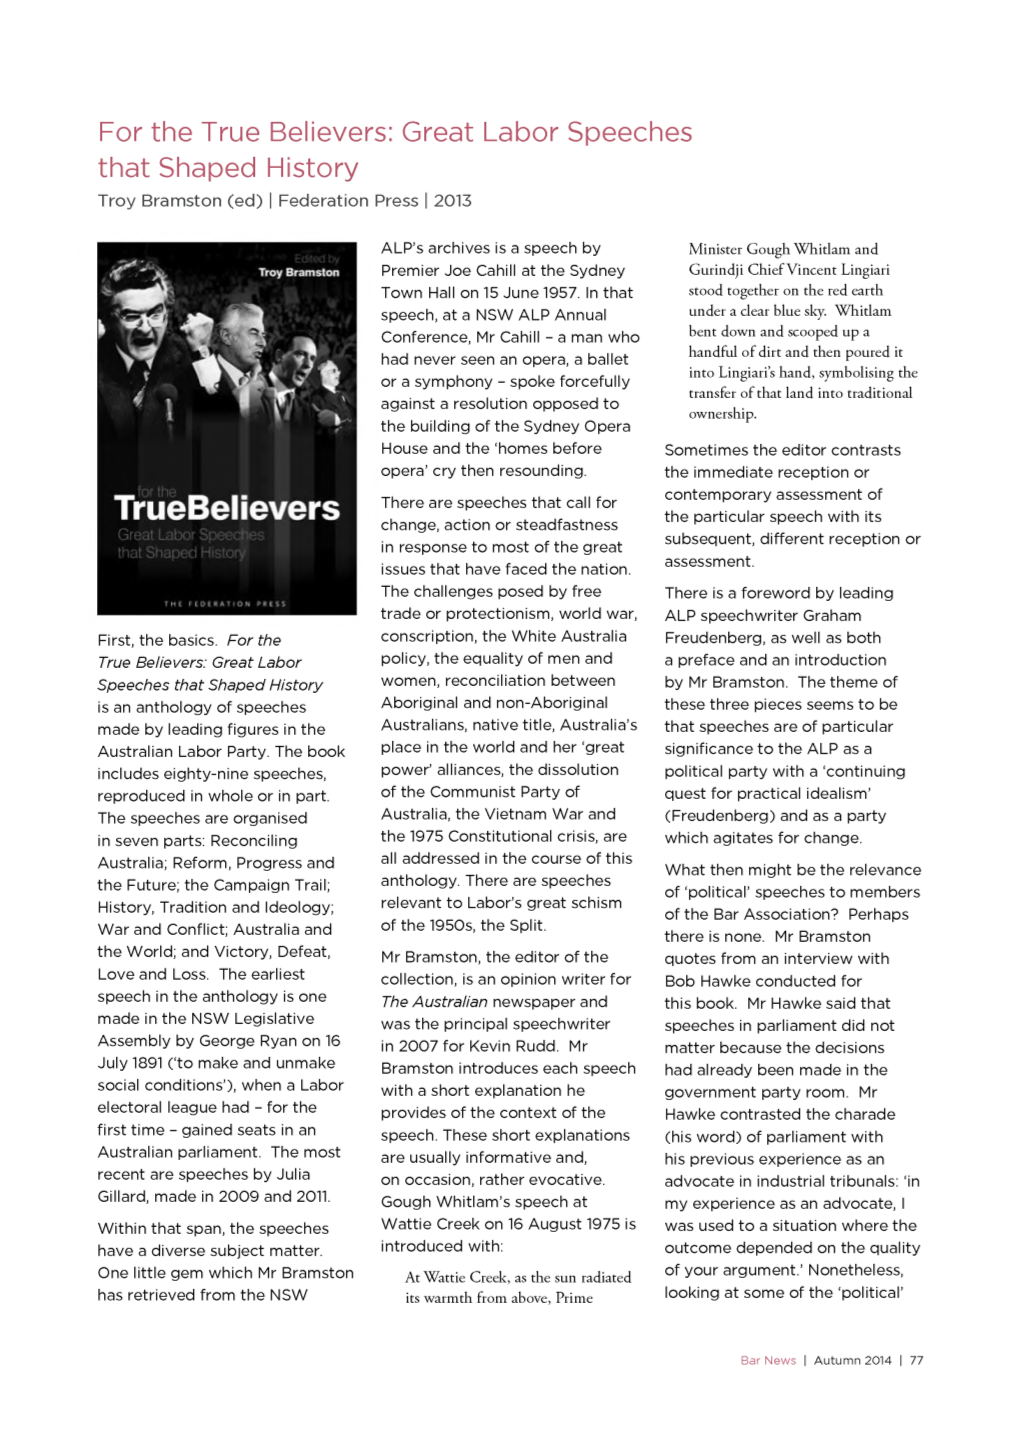 For the True Believers: Great Labor Speeches That Shaped History Troy Bramston (Ed) | Federation Press | 2013